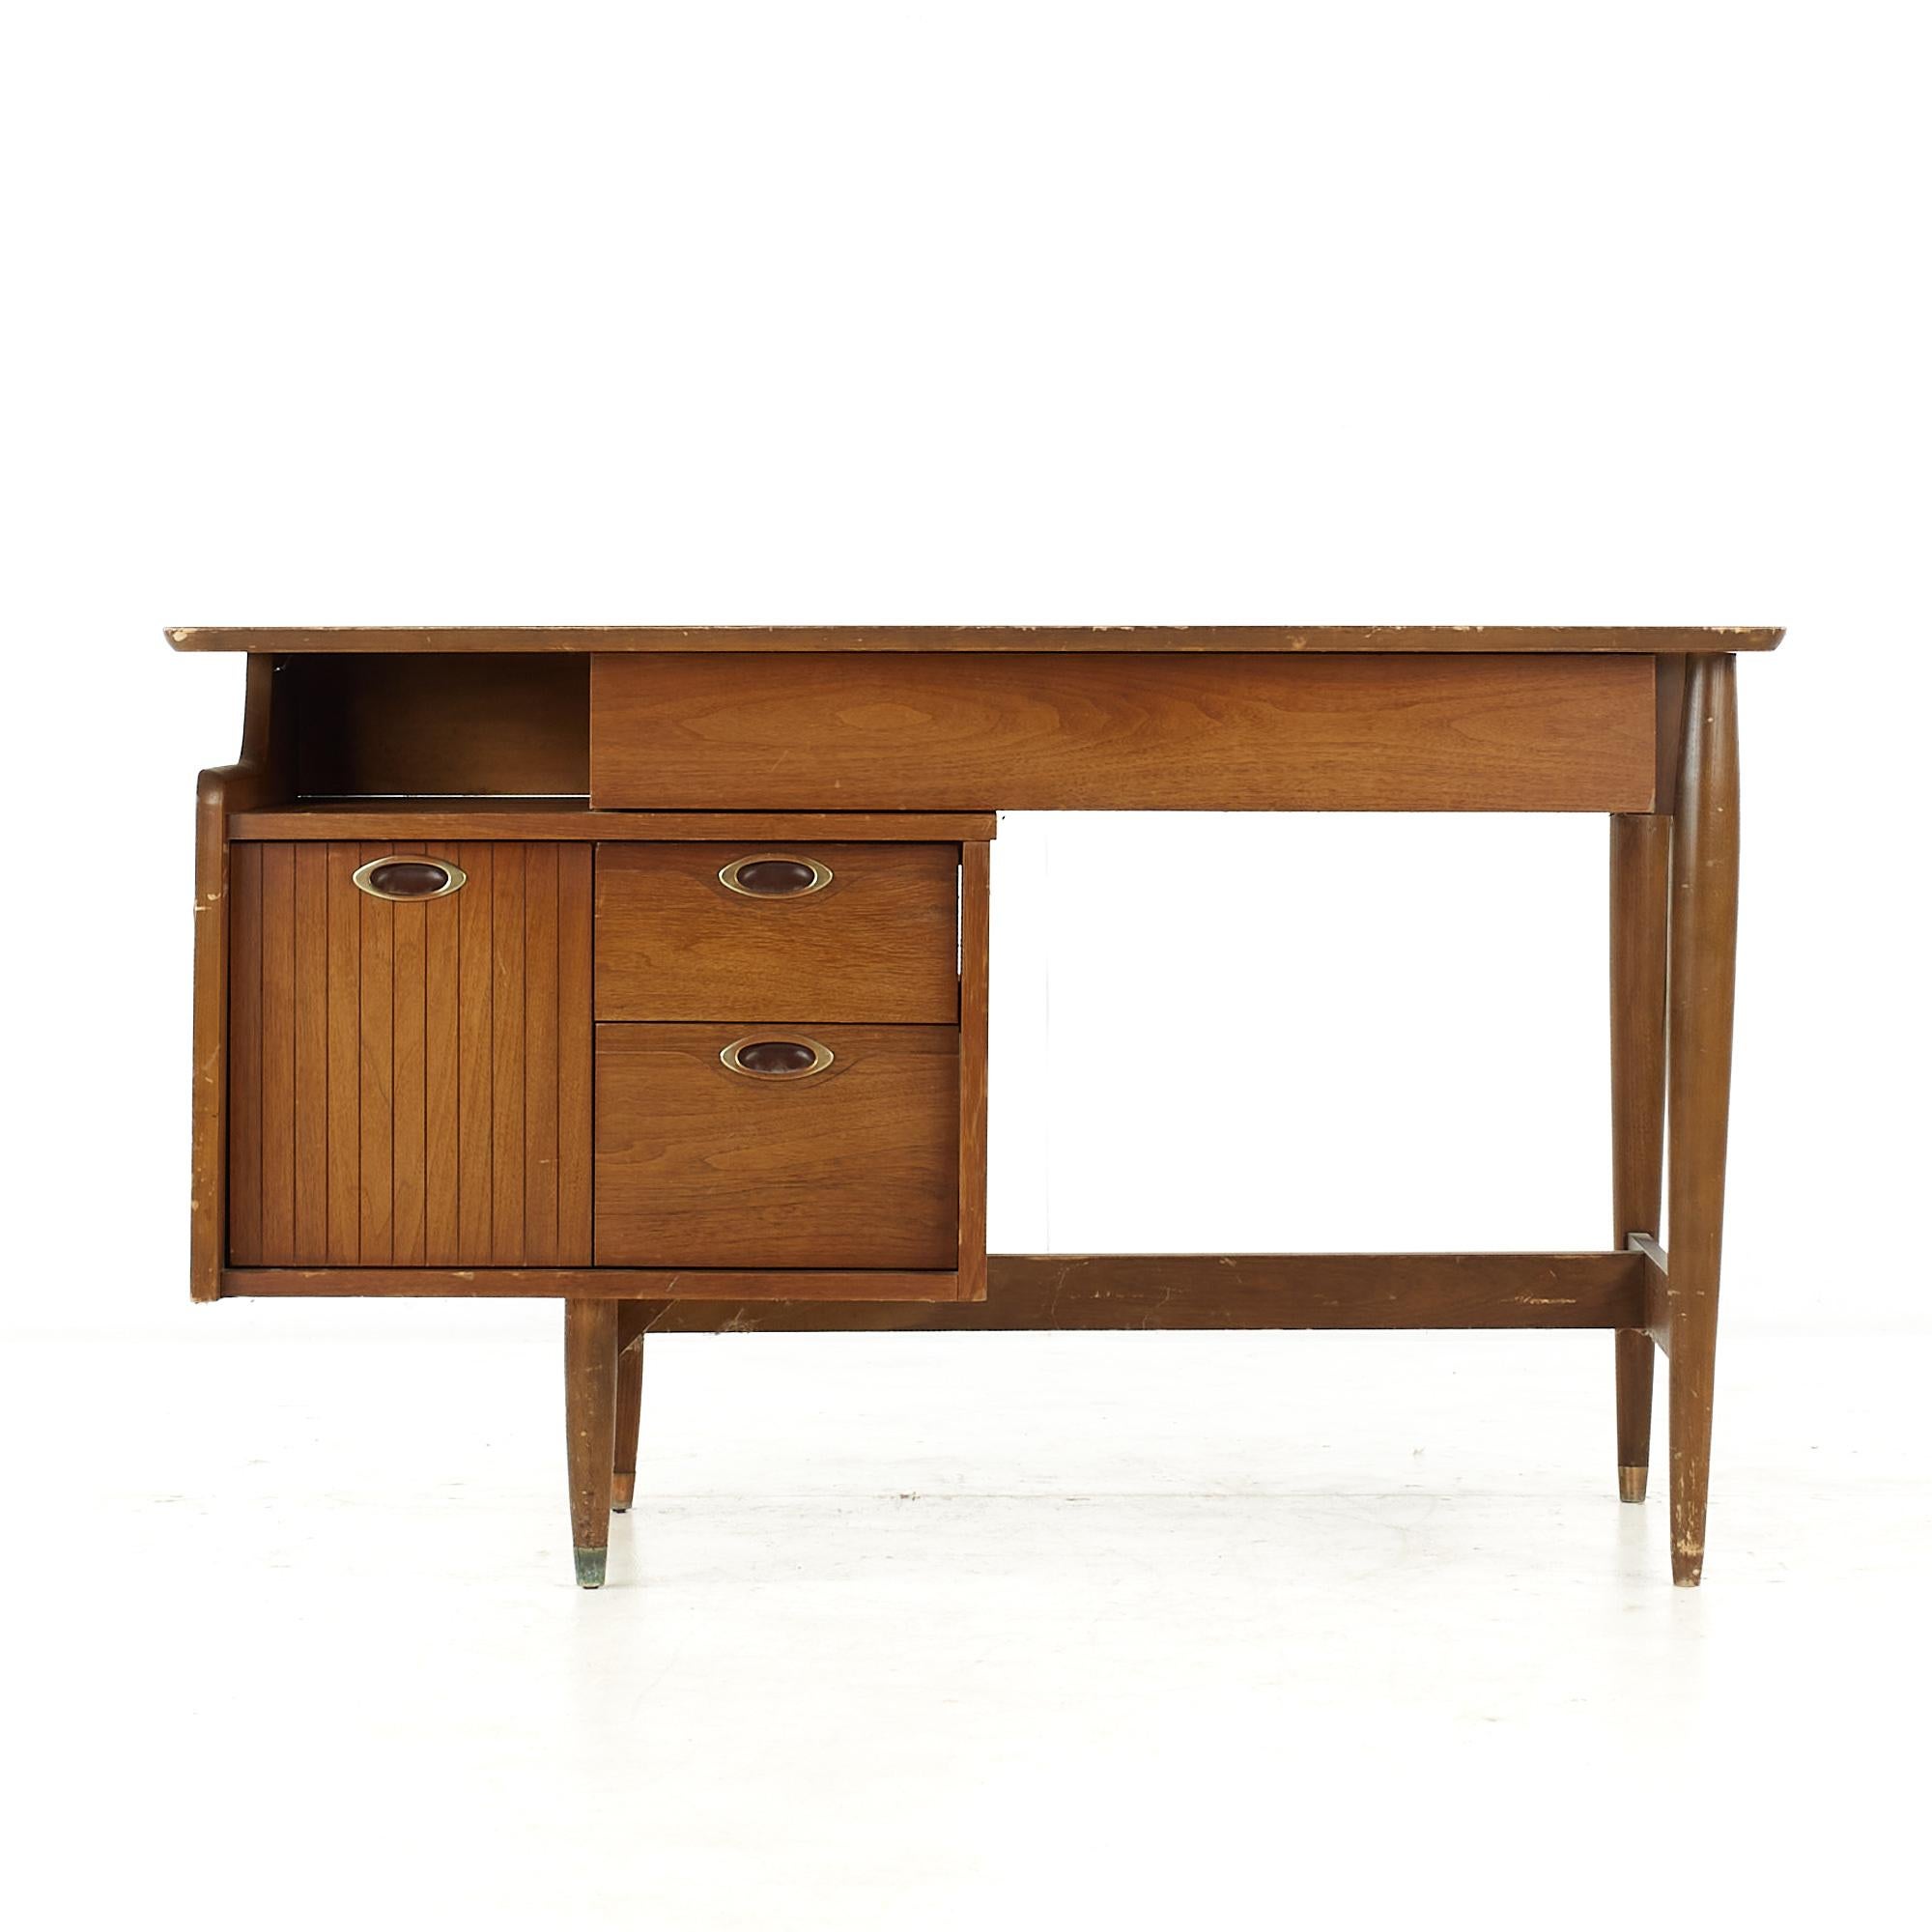 Hooker Mainline Mid Century Walnut single pedestal desk

This desk measures: 22 wide x 22 deep x 22 high, with a chair clearance of 17 inches

All pieces of furniture can be had in what we call restored vintage condition. That means the piece is